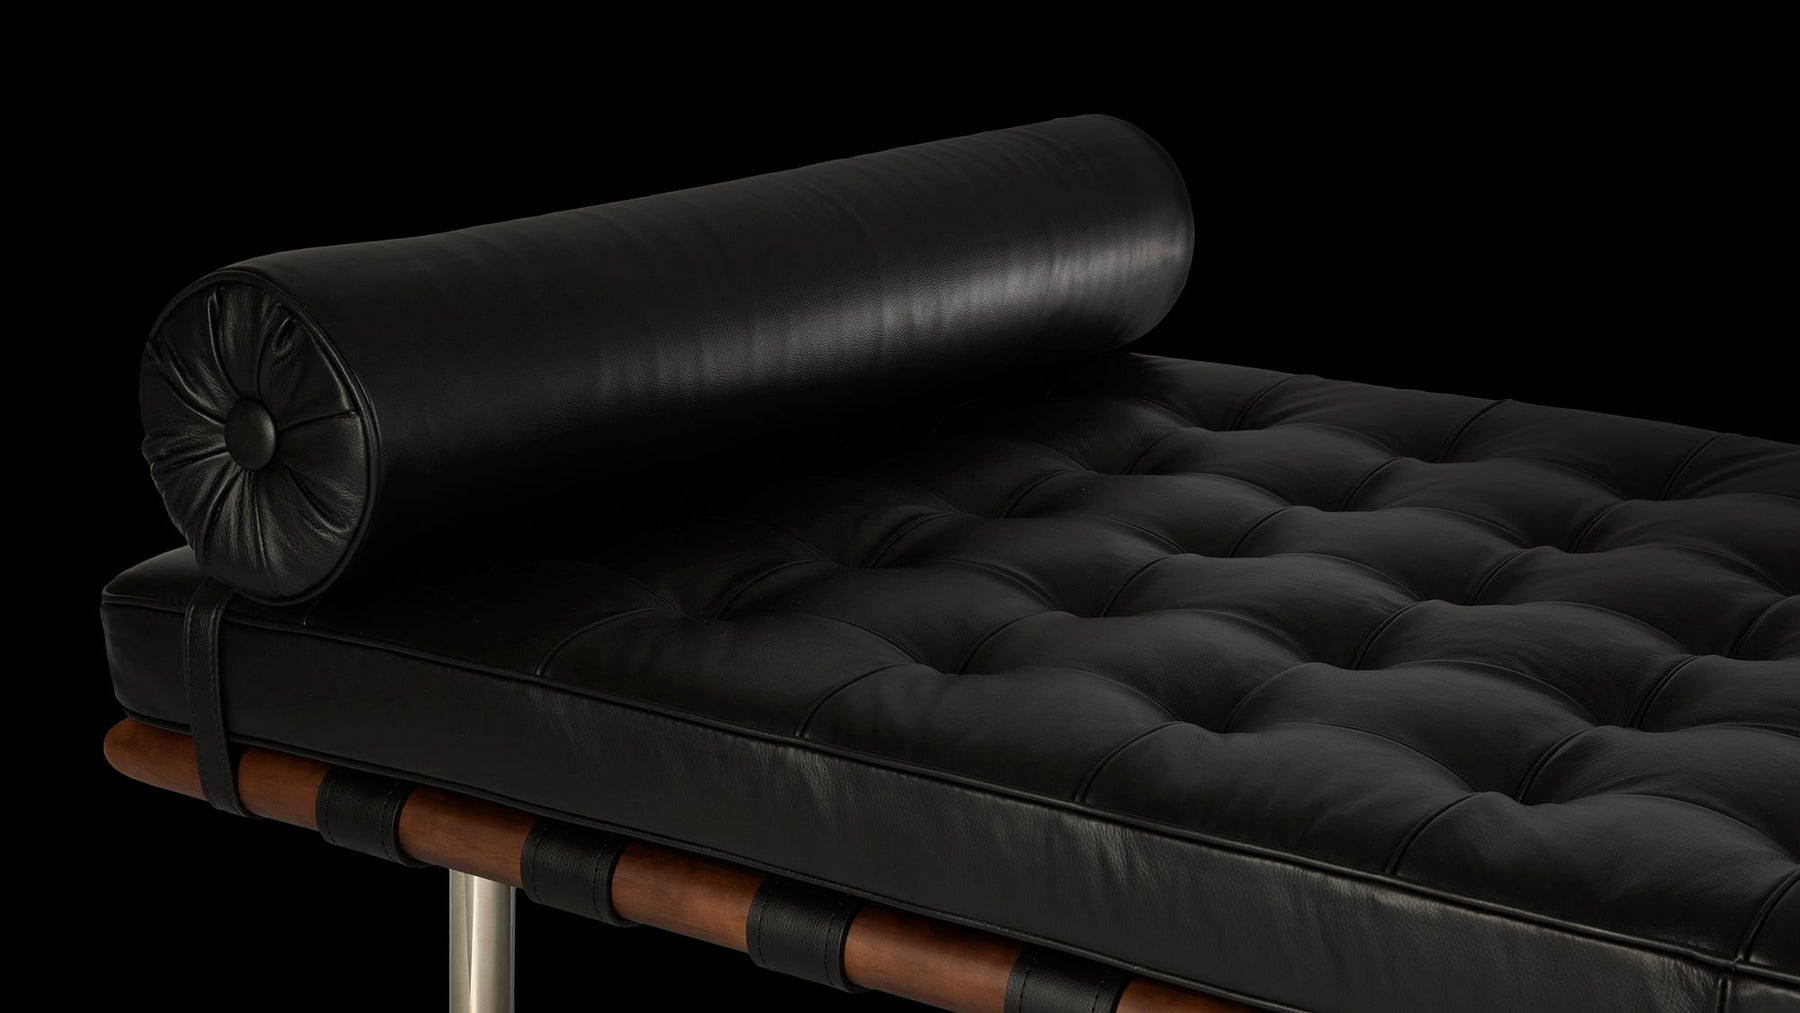 The flicker of light is all that illuminates a Van Der Rohe Barcelona Daybed with dark black leather against the dark backdrop of this banner photograph